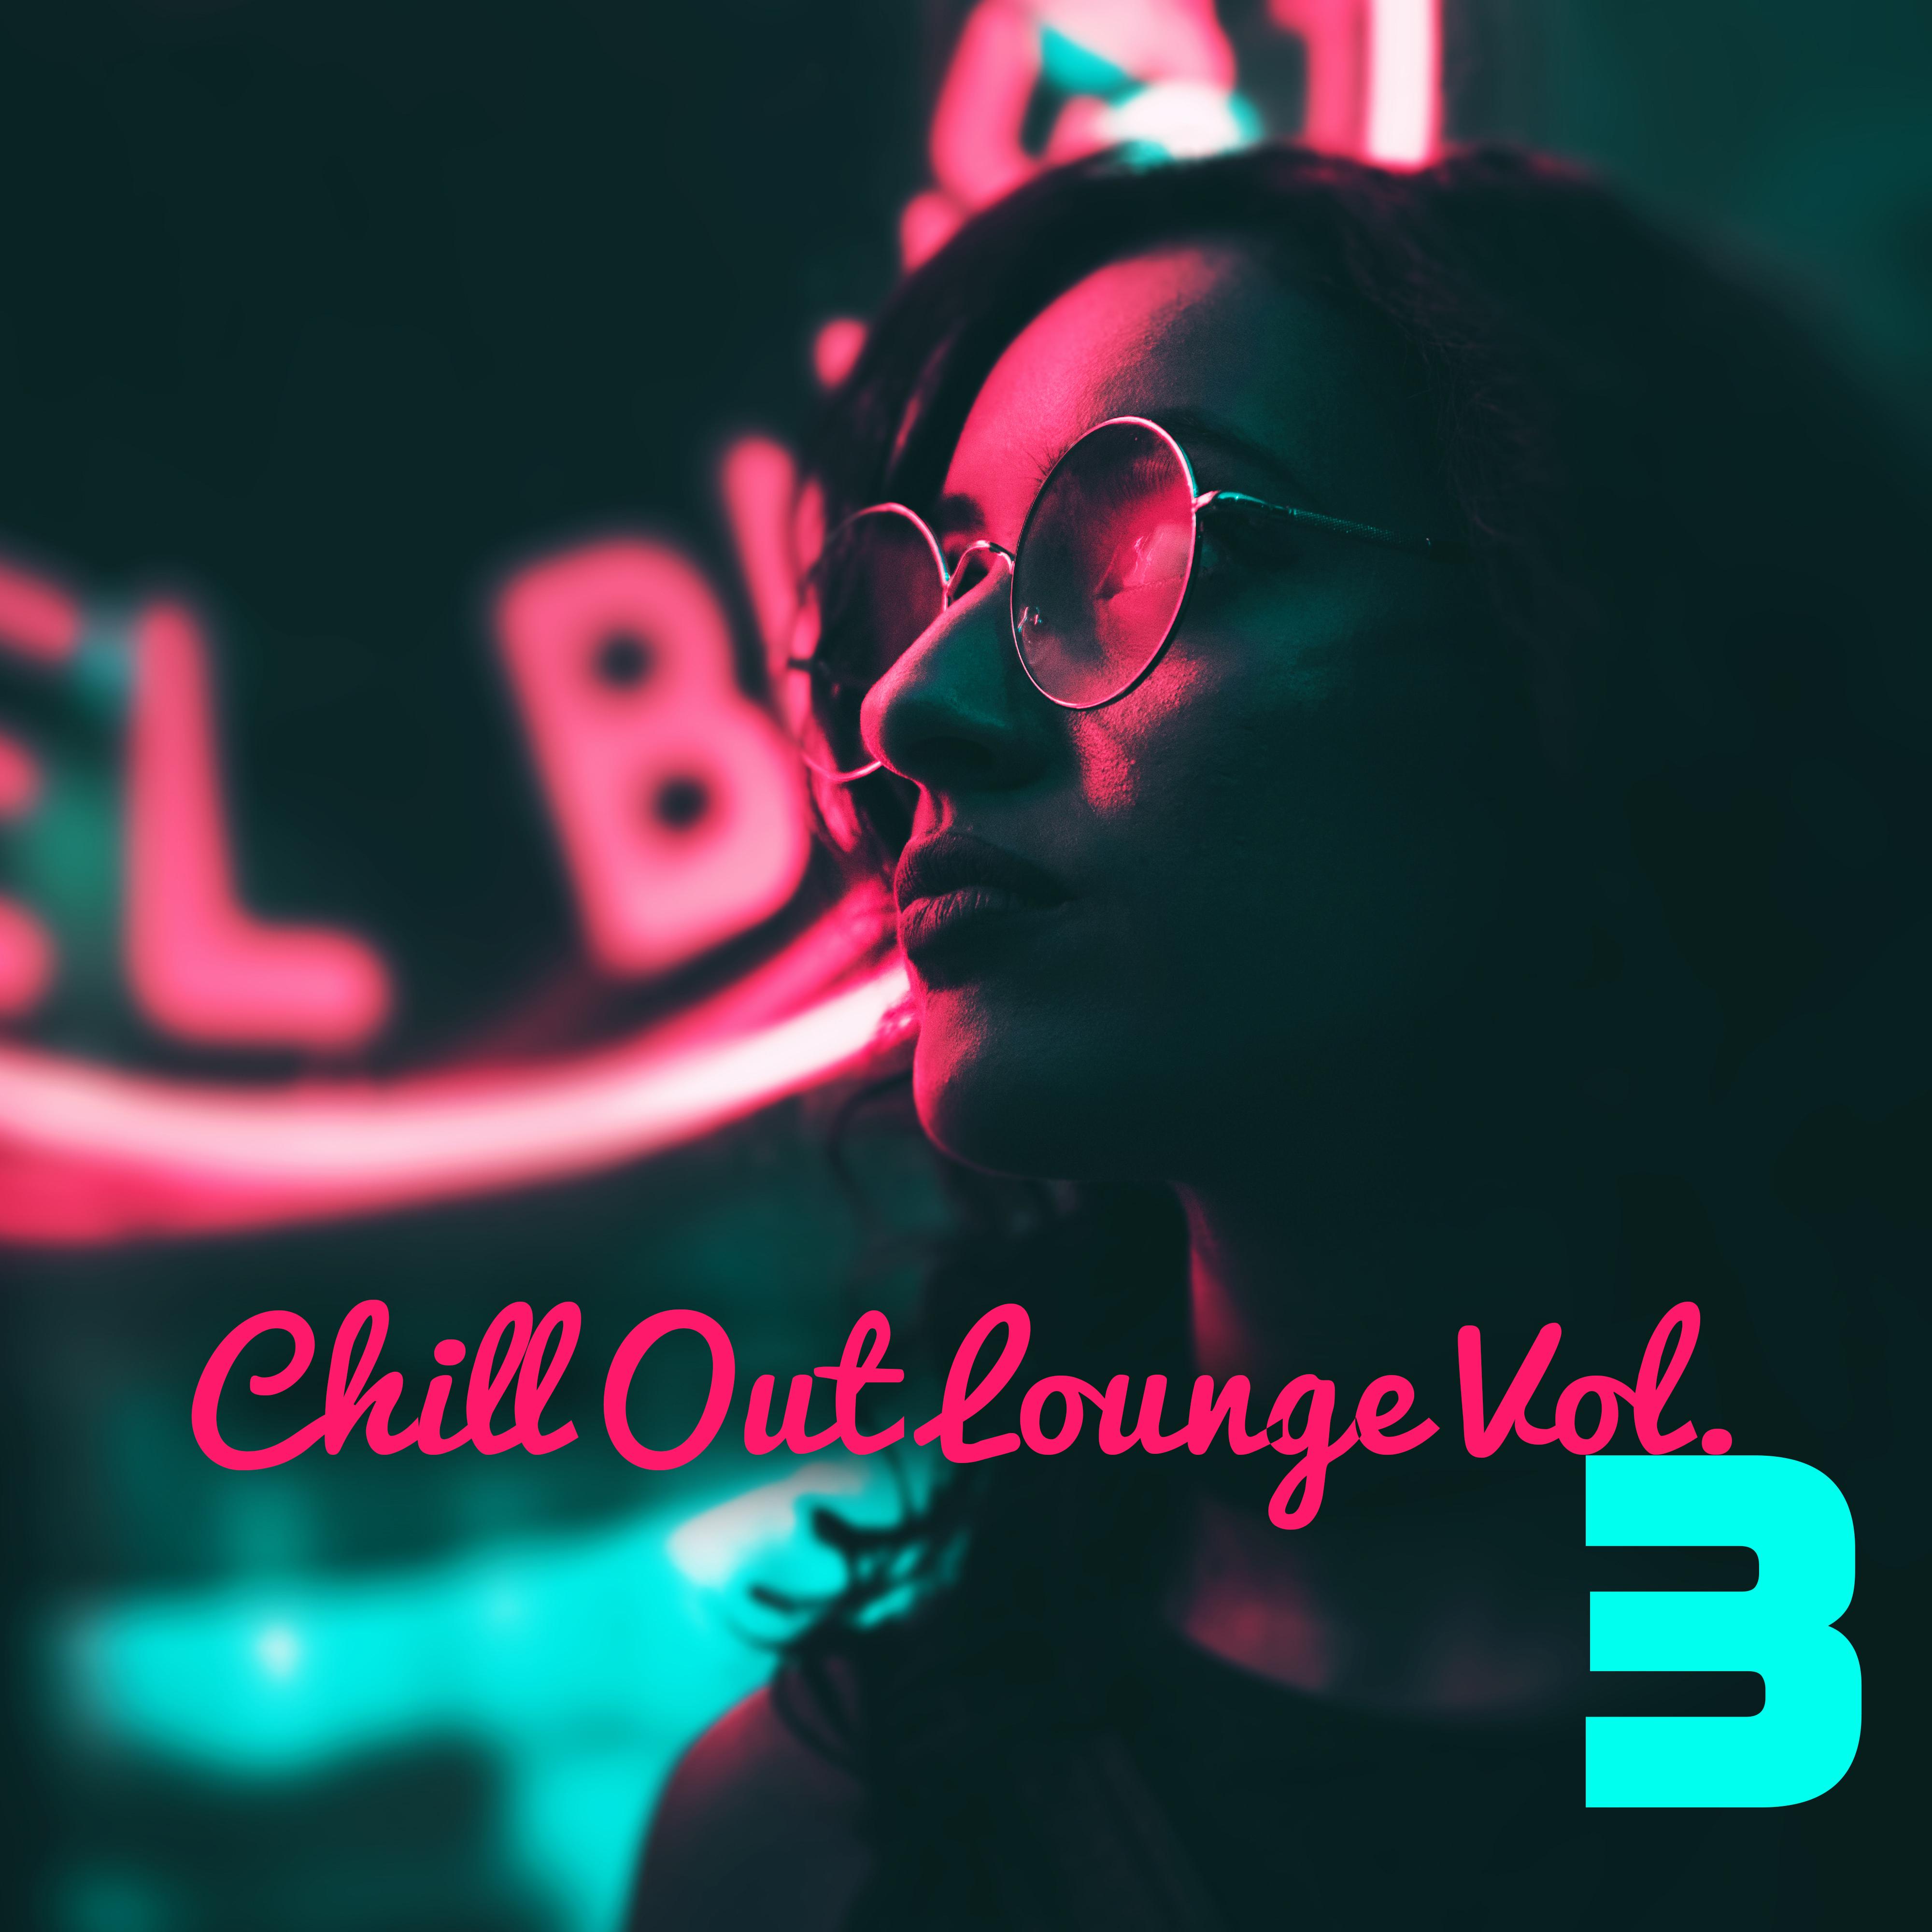 Chill Out Lounge Vol. 3